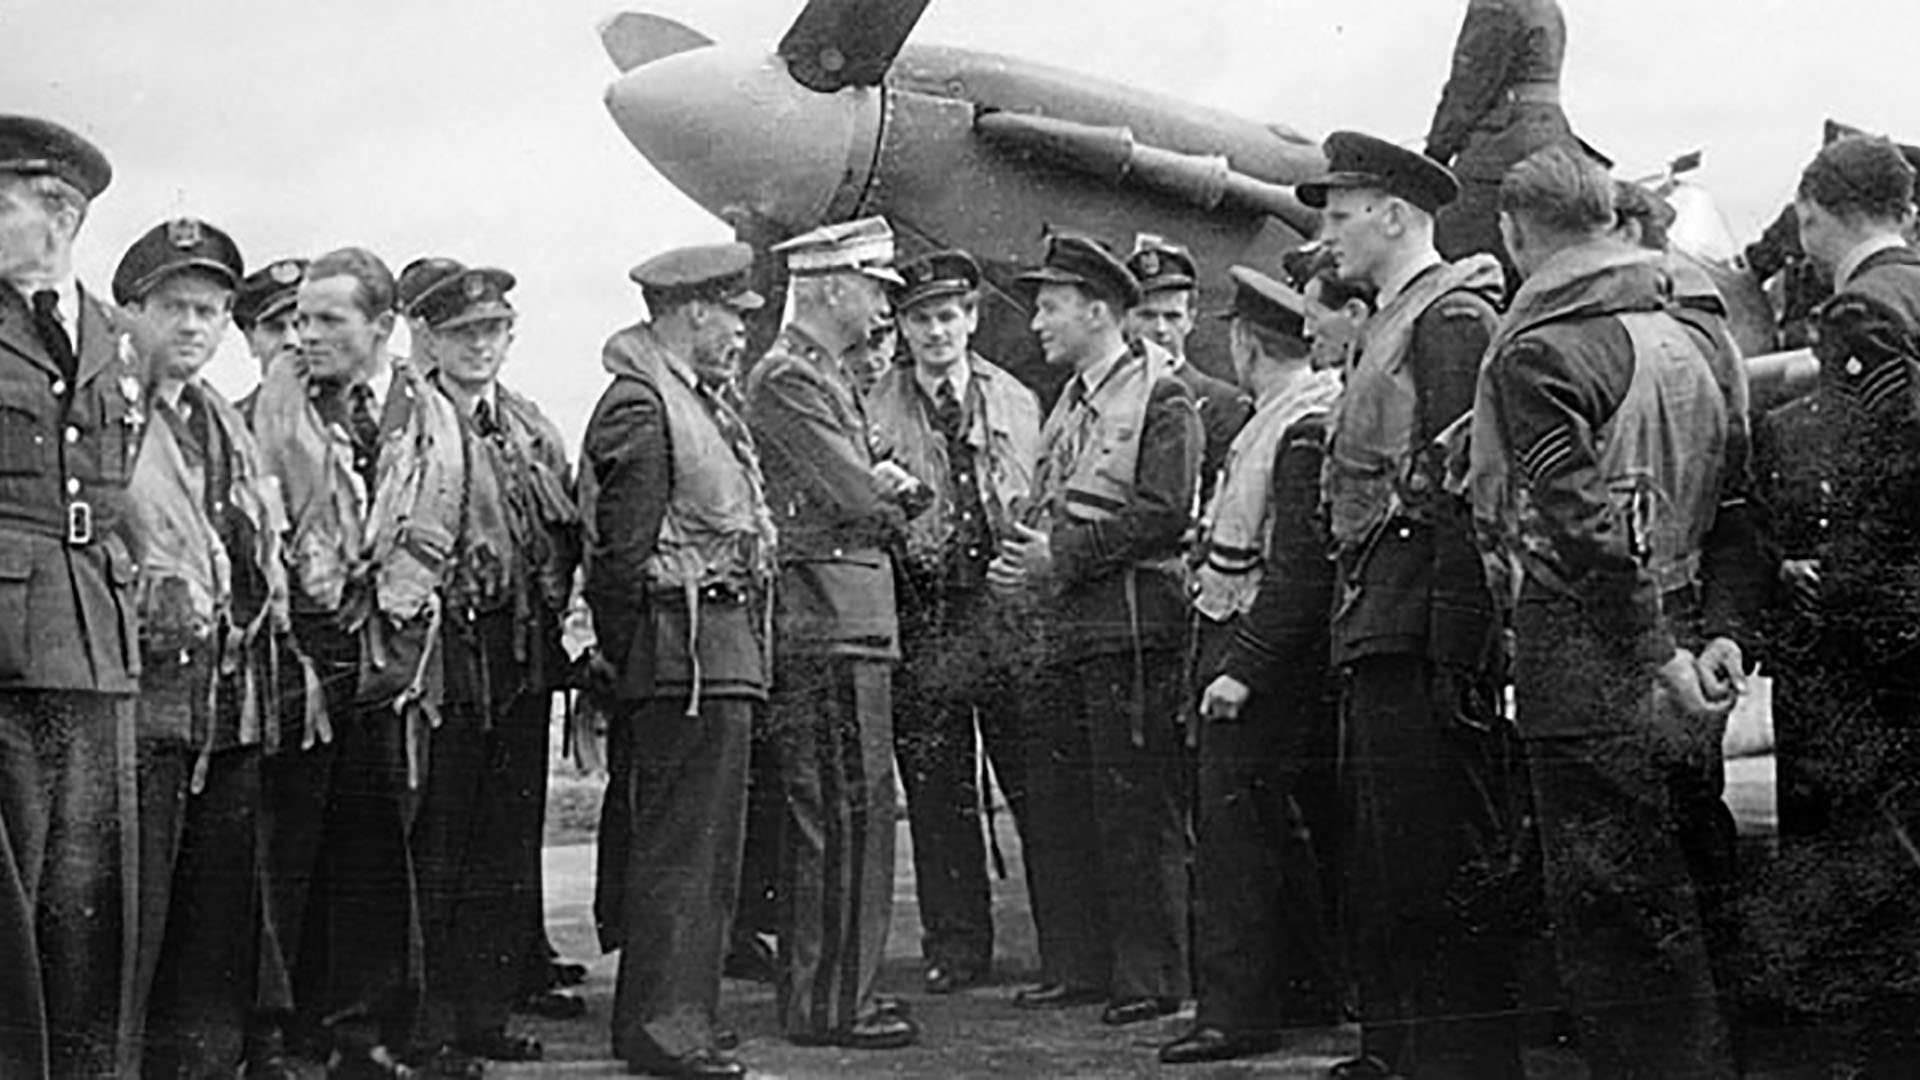 General Sosnkowski in conversation with pilots of R.A.F. 315 (City of Deblin) Squadron who have just staged a flypast at R.A.F. Ballyhalbert, Co. Down. This was a highlight of the Squadron Day celebrations on 14th August 1943. Talking to him is Flight Lieutenant Zajac and Squadron Leader Jerszy Poplawski. In the background is Supermarine Spitfire V BM144 PK-O.